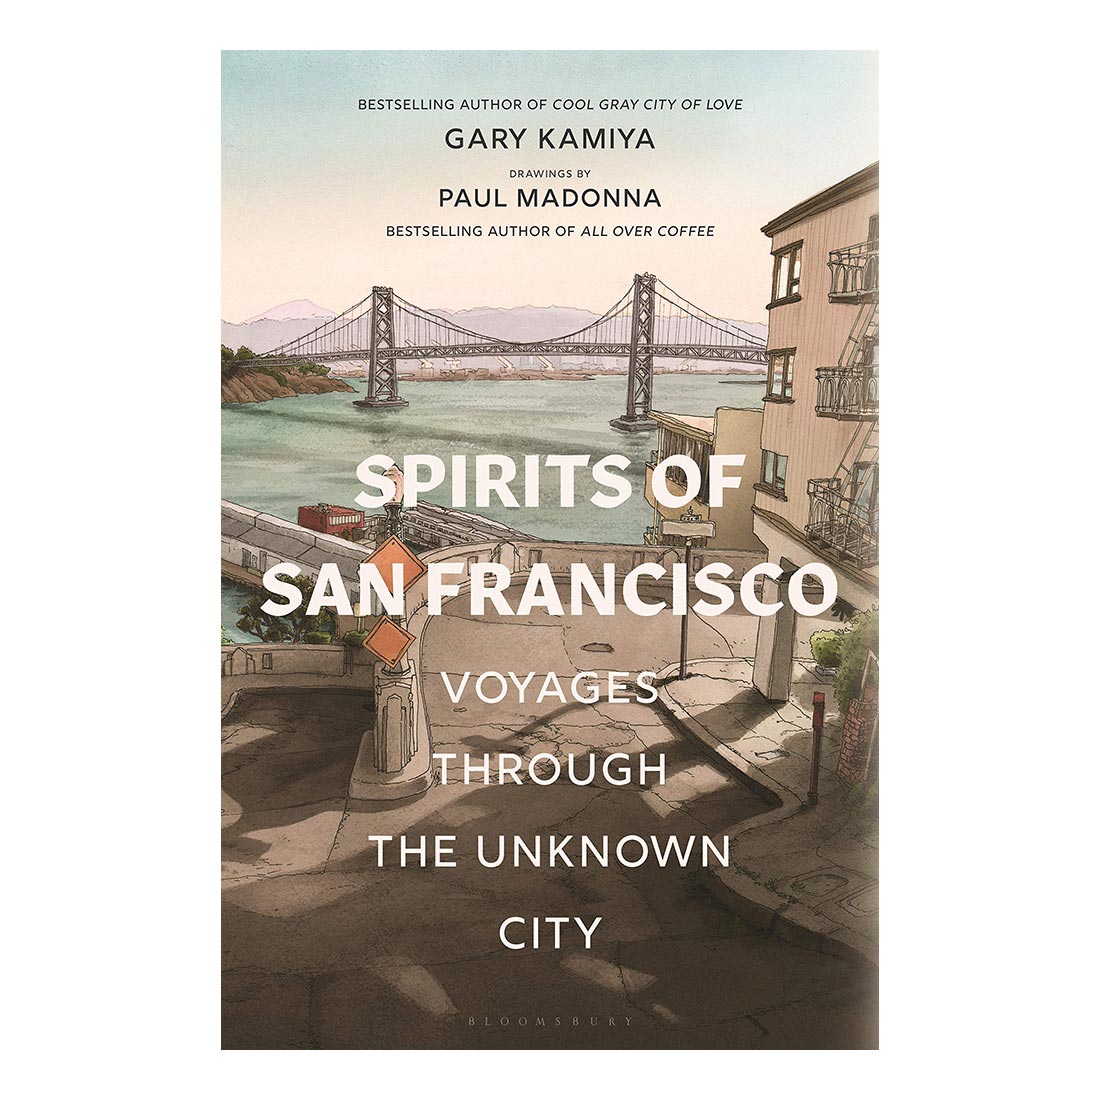 Spirits of San Francisco: Voyages through the Unknown CitySpirits of San Francisco: Voyages through the Unknown City